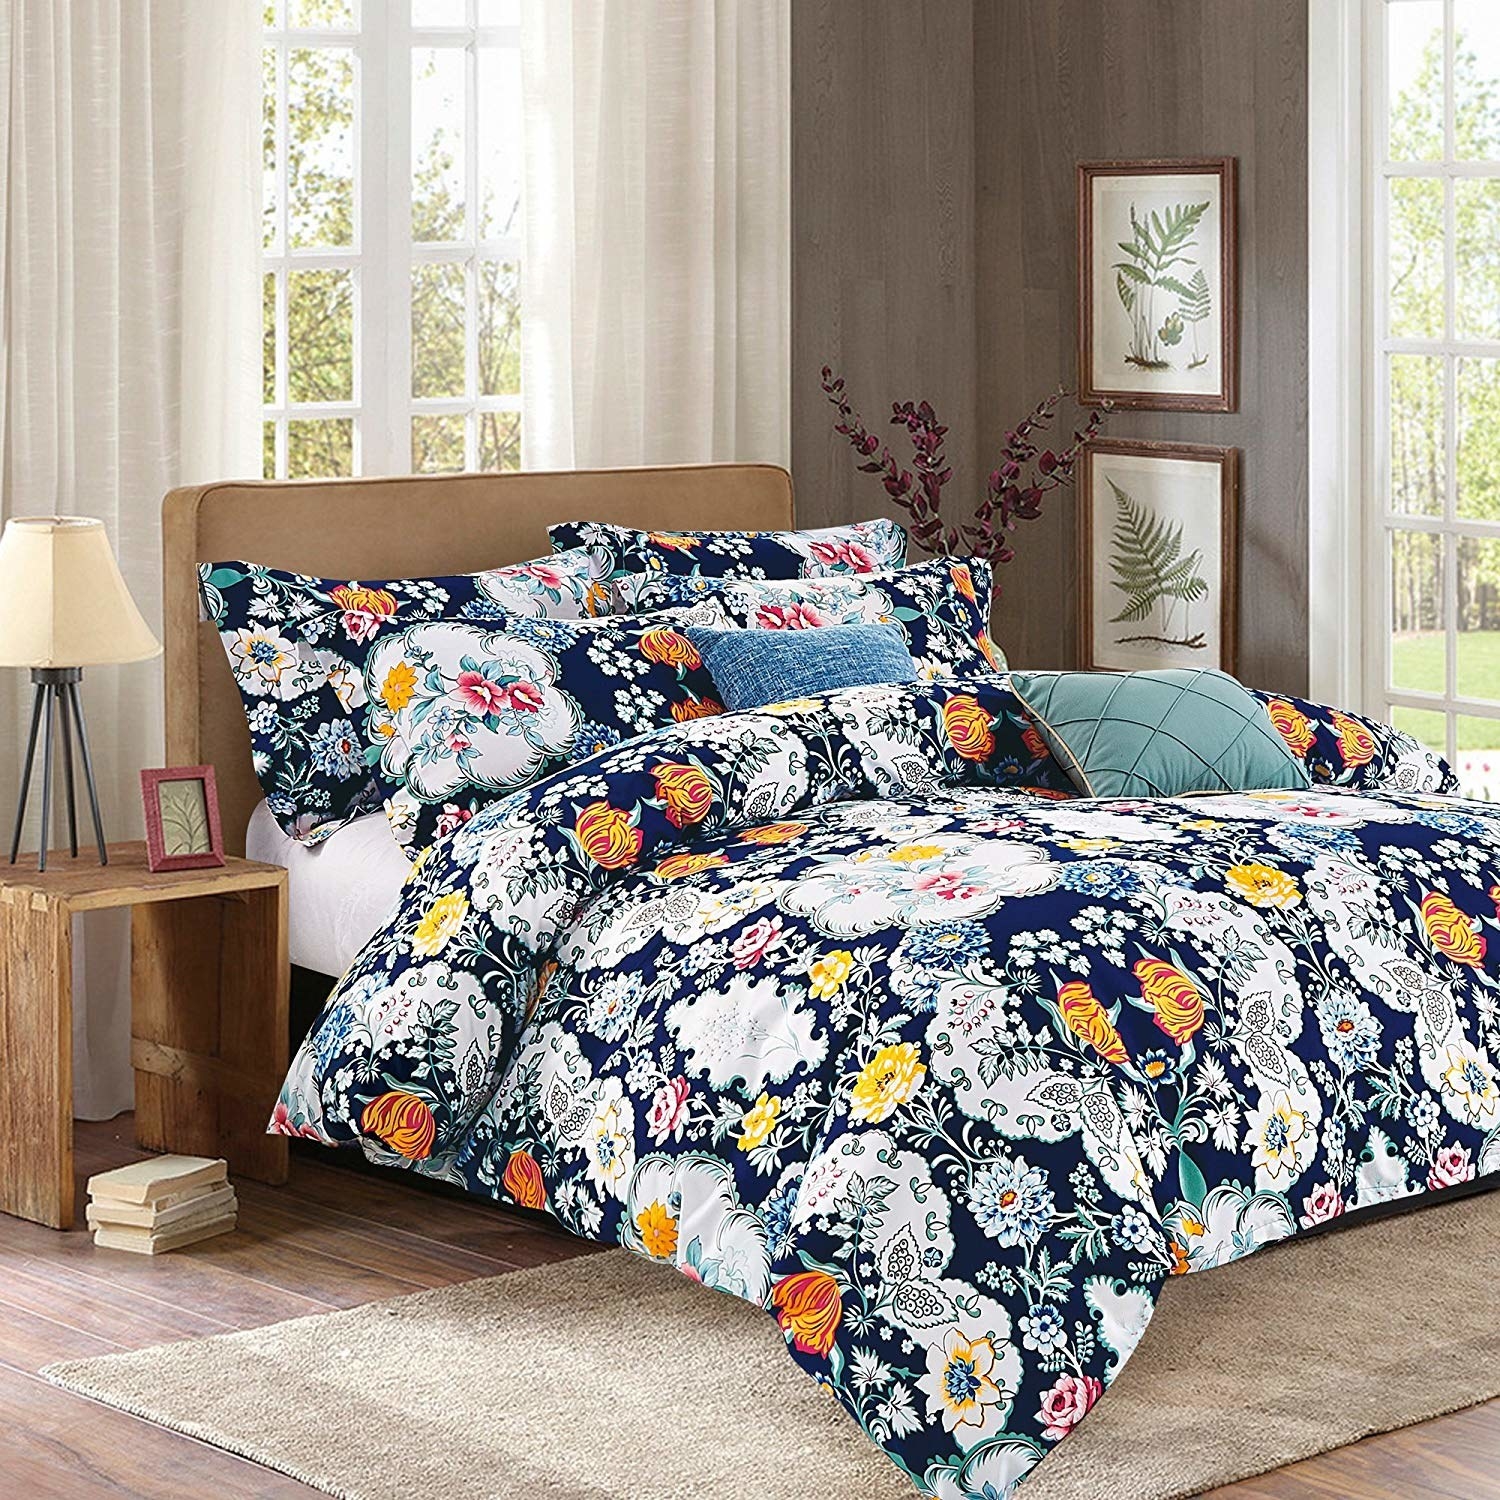 the blue microfiber duvet set with a bright floral print in various colors